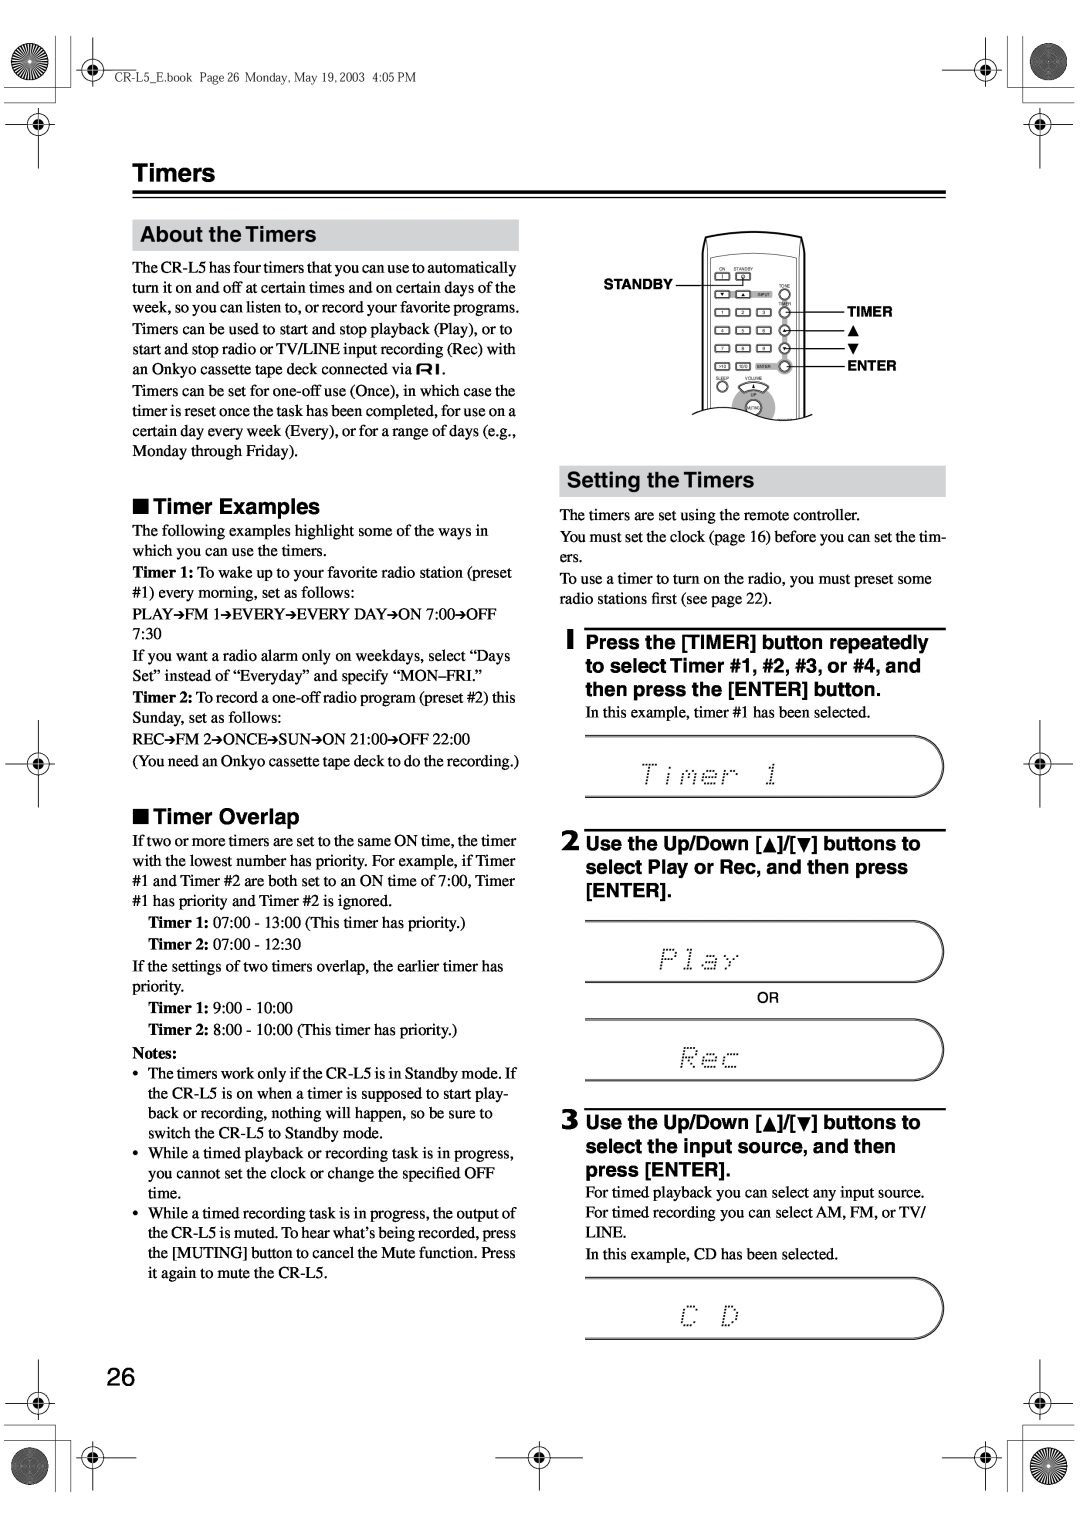 Onkyo CR-L5 instruction manual About the Timers, Timer Examples, Setting the Timers, Timer Overlap 